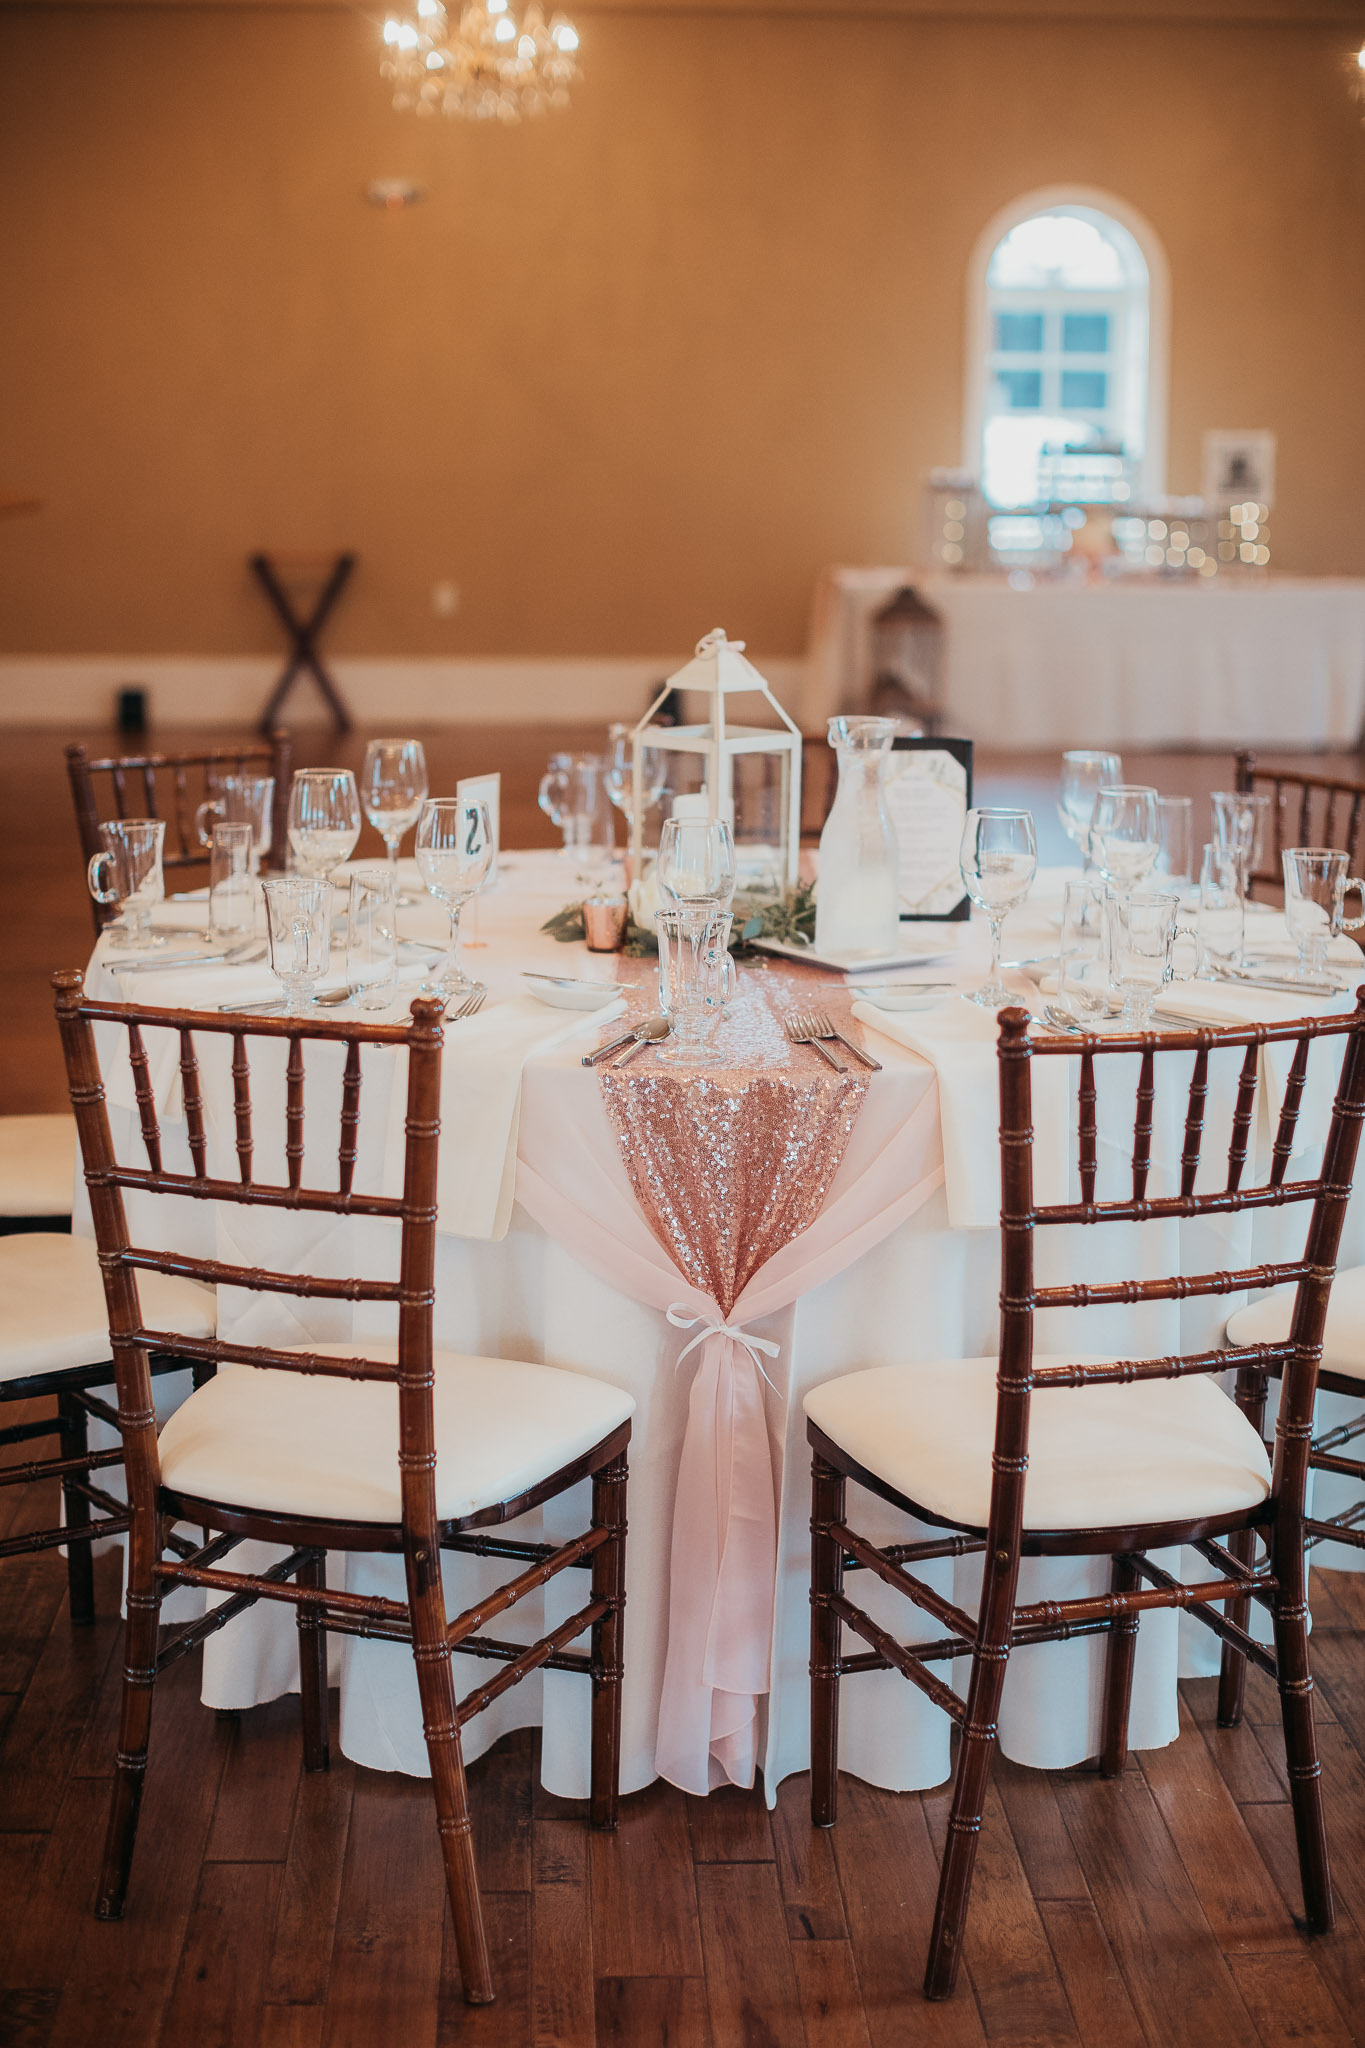 A table set up with chairs and a pink tablecloth.